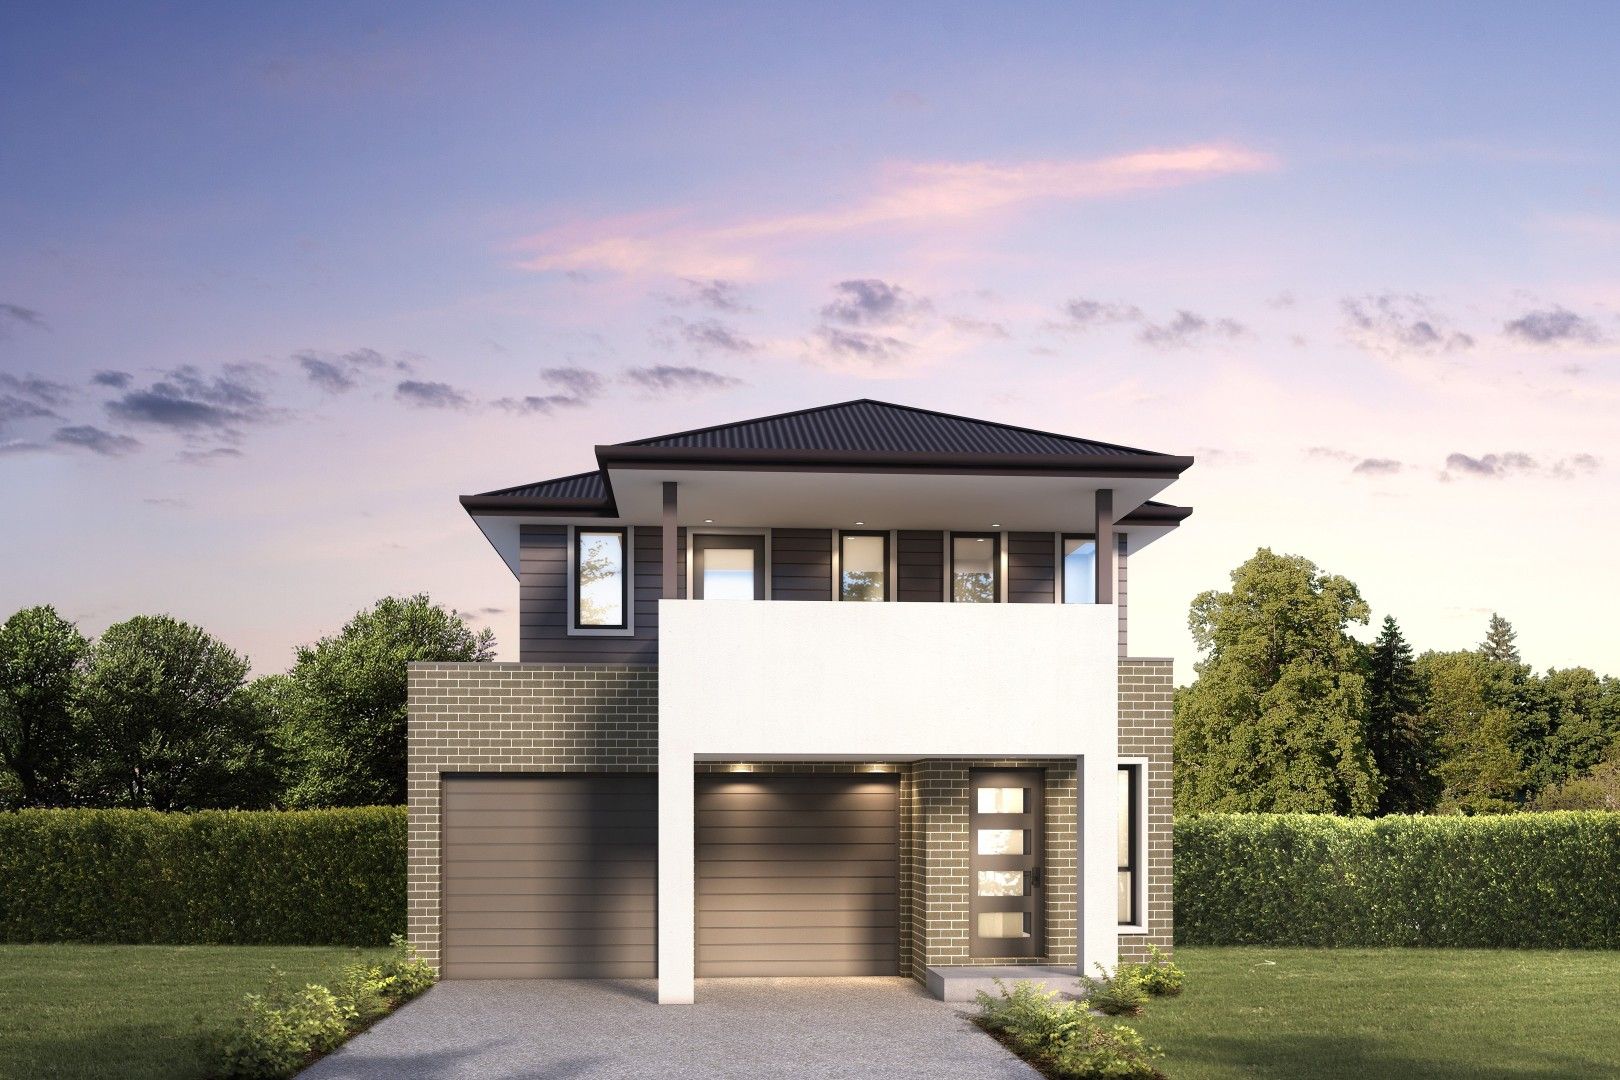 4 bedrooms New House & Land in Lot 49 Road 01 GLEDSWOOD HILLS NSW, 2557